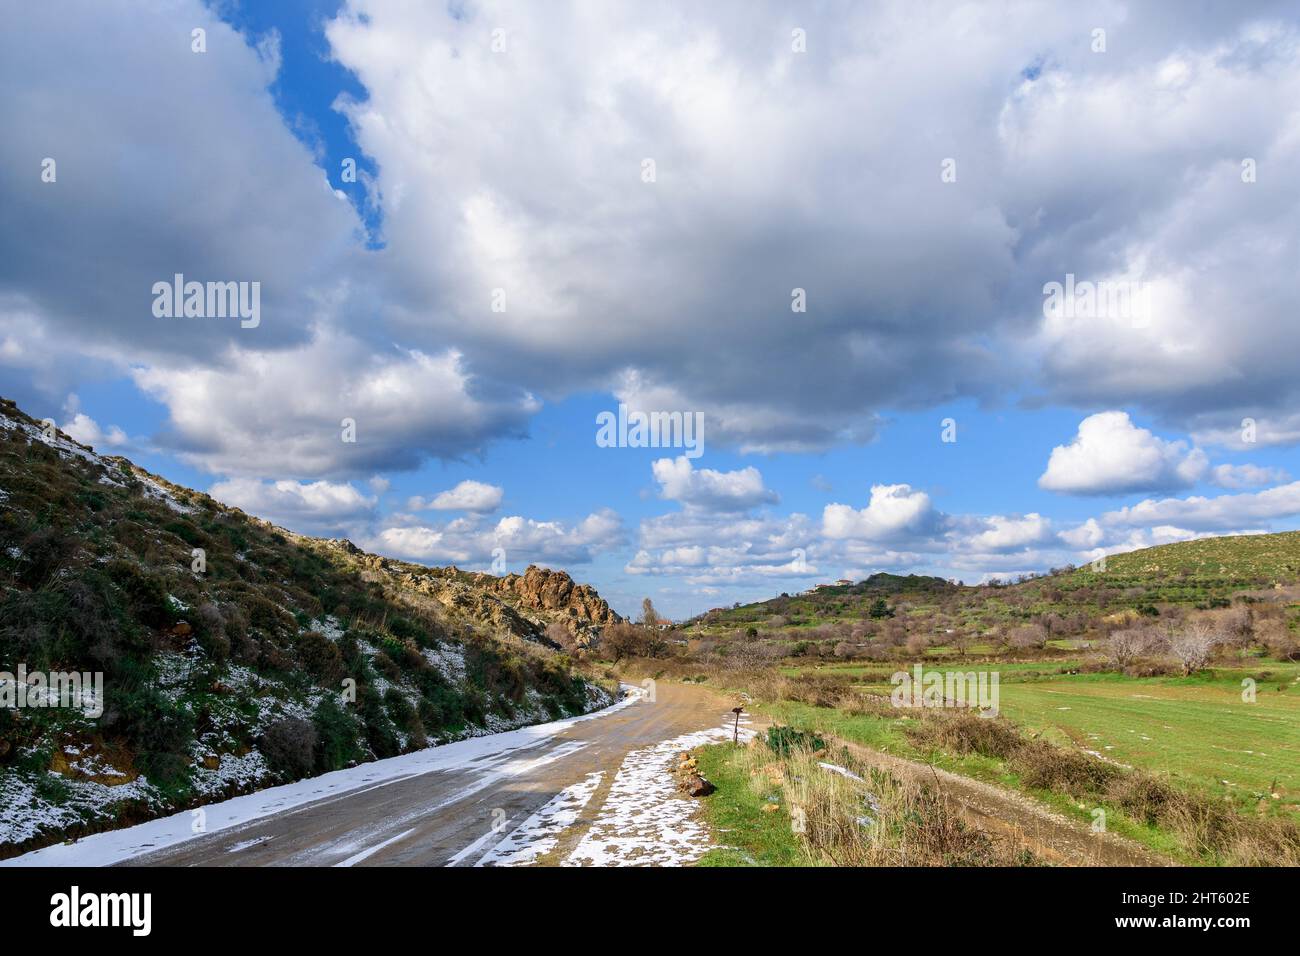 Myrina of the island of Lemnos, with snowy roads and blue sky with clouds. The castle in the background. Stock Photo